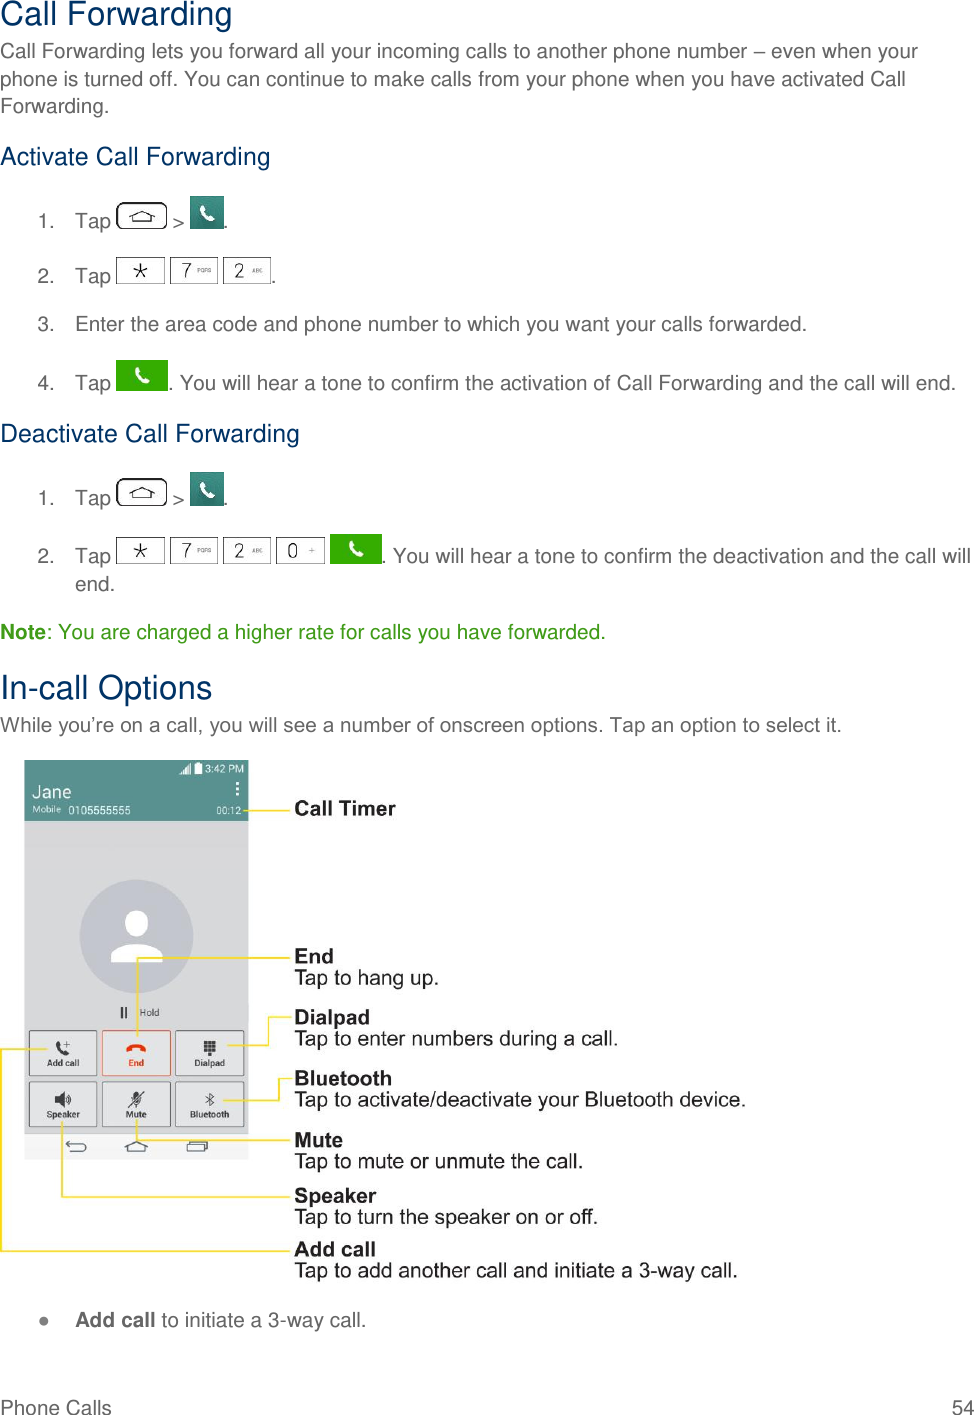 Phone Calls  54 Call Forwarding Call Forwarding lets you forward all your incoming calls to another phone number – even when your phone is turned off. You can continue to make calls from your phone when you have activated Call Forwarding. Activate Call Forwarding 1.  Tap   &gt;  . 2.  Tap      . 3.  Enter the area code and phone number to which you want your calls forwarded. 4.  Tap  . You will hear a tone to confirm the activation of Call Forwarding and the call will end. Deactivate Call Forwarding 1.  Tap   &gt;  . 2.  Tap          . You will hear a tone to confirm the deactivation and the call will end. Note: You are charged a higher rate for calls you have forwarded. In-call Options While you‘re on a call, you will see a number of onscreen options. Tap an option to select it.  ● Add call to initiate a 3-way call.  